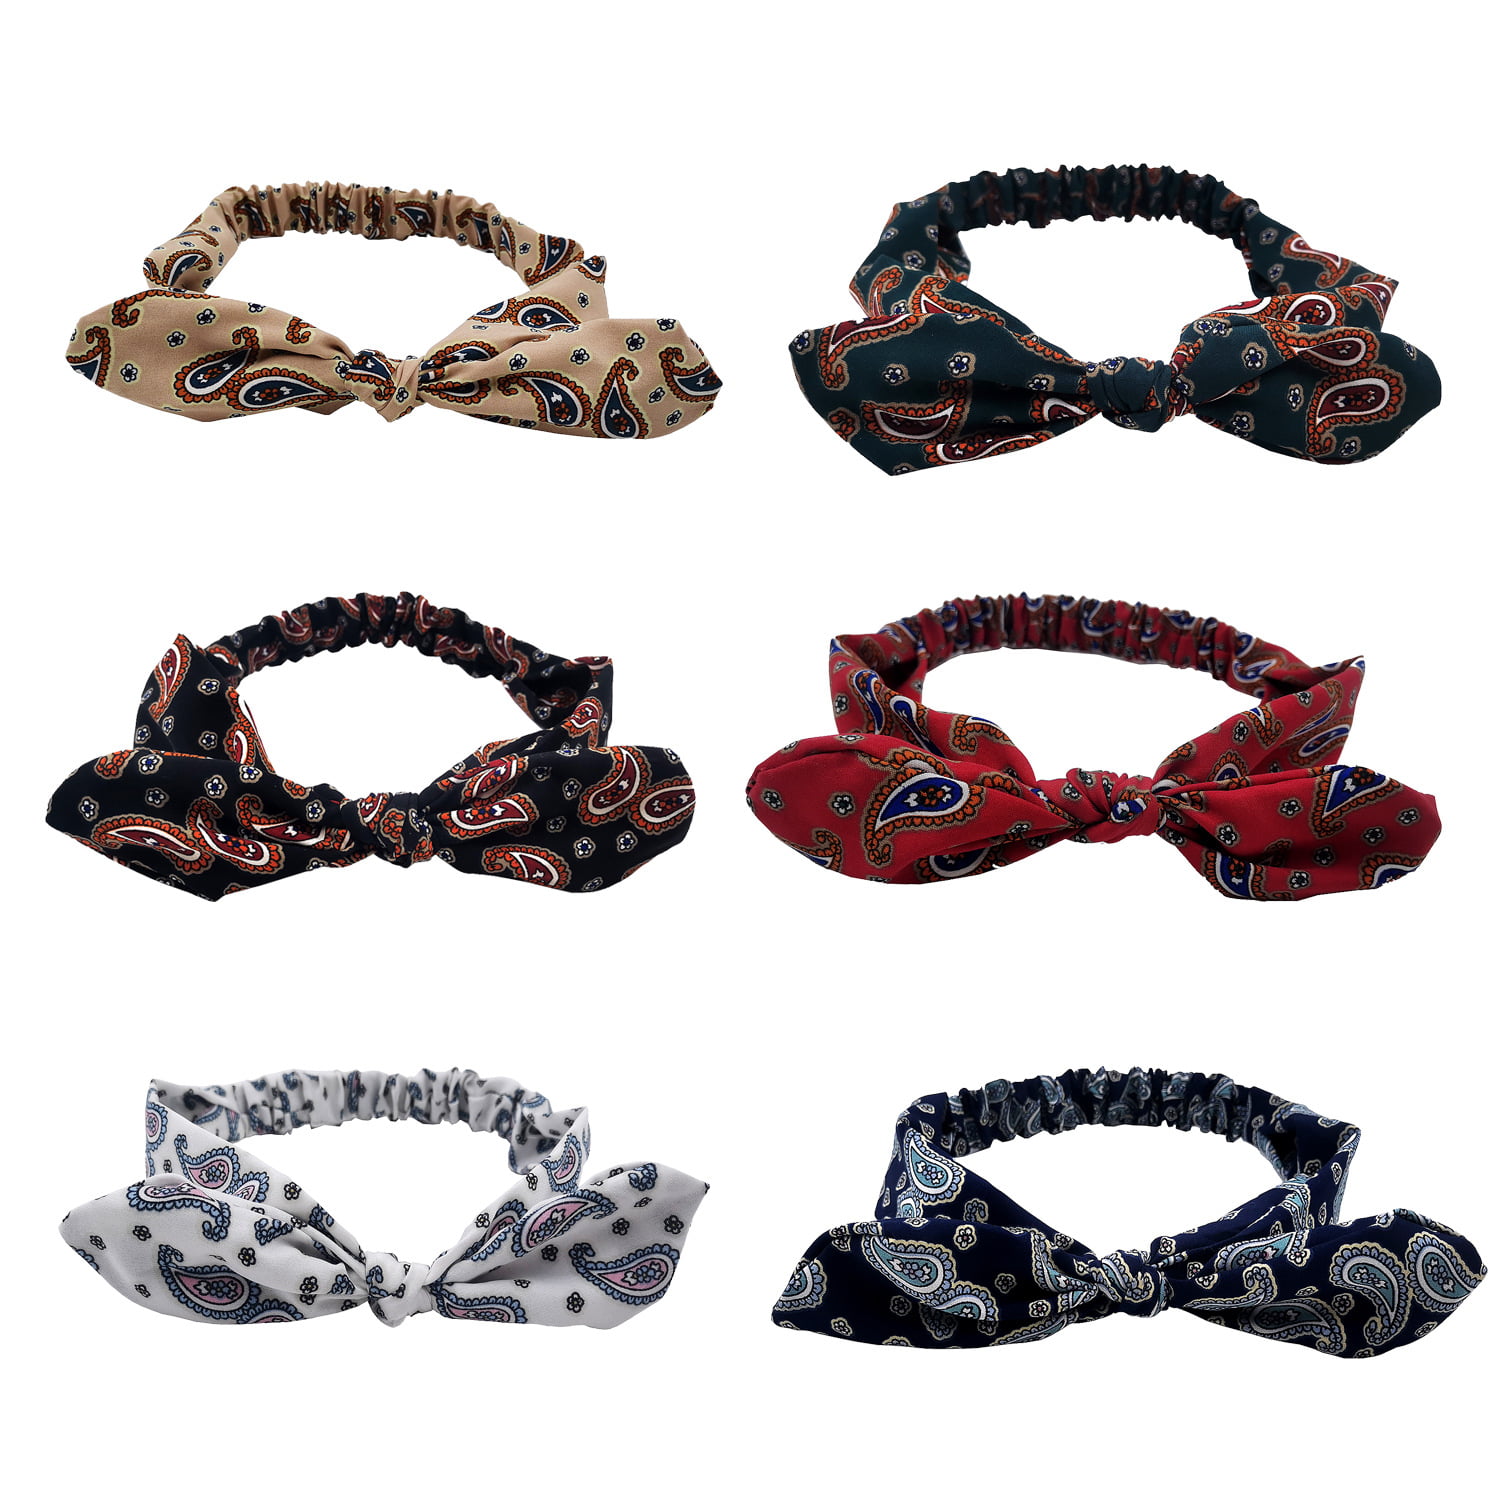 Carede Boho Bow Headbands for Women Vintage Floral Printed Rabbit ears Elastic Head Wrap Twisted Cute Hair Accessories 6 Pack 